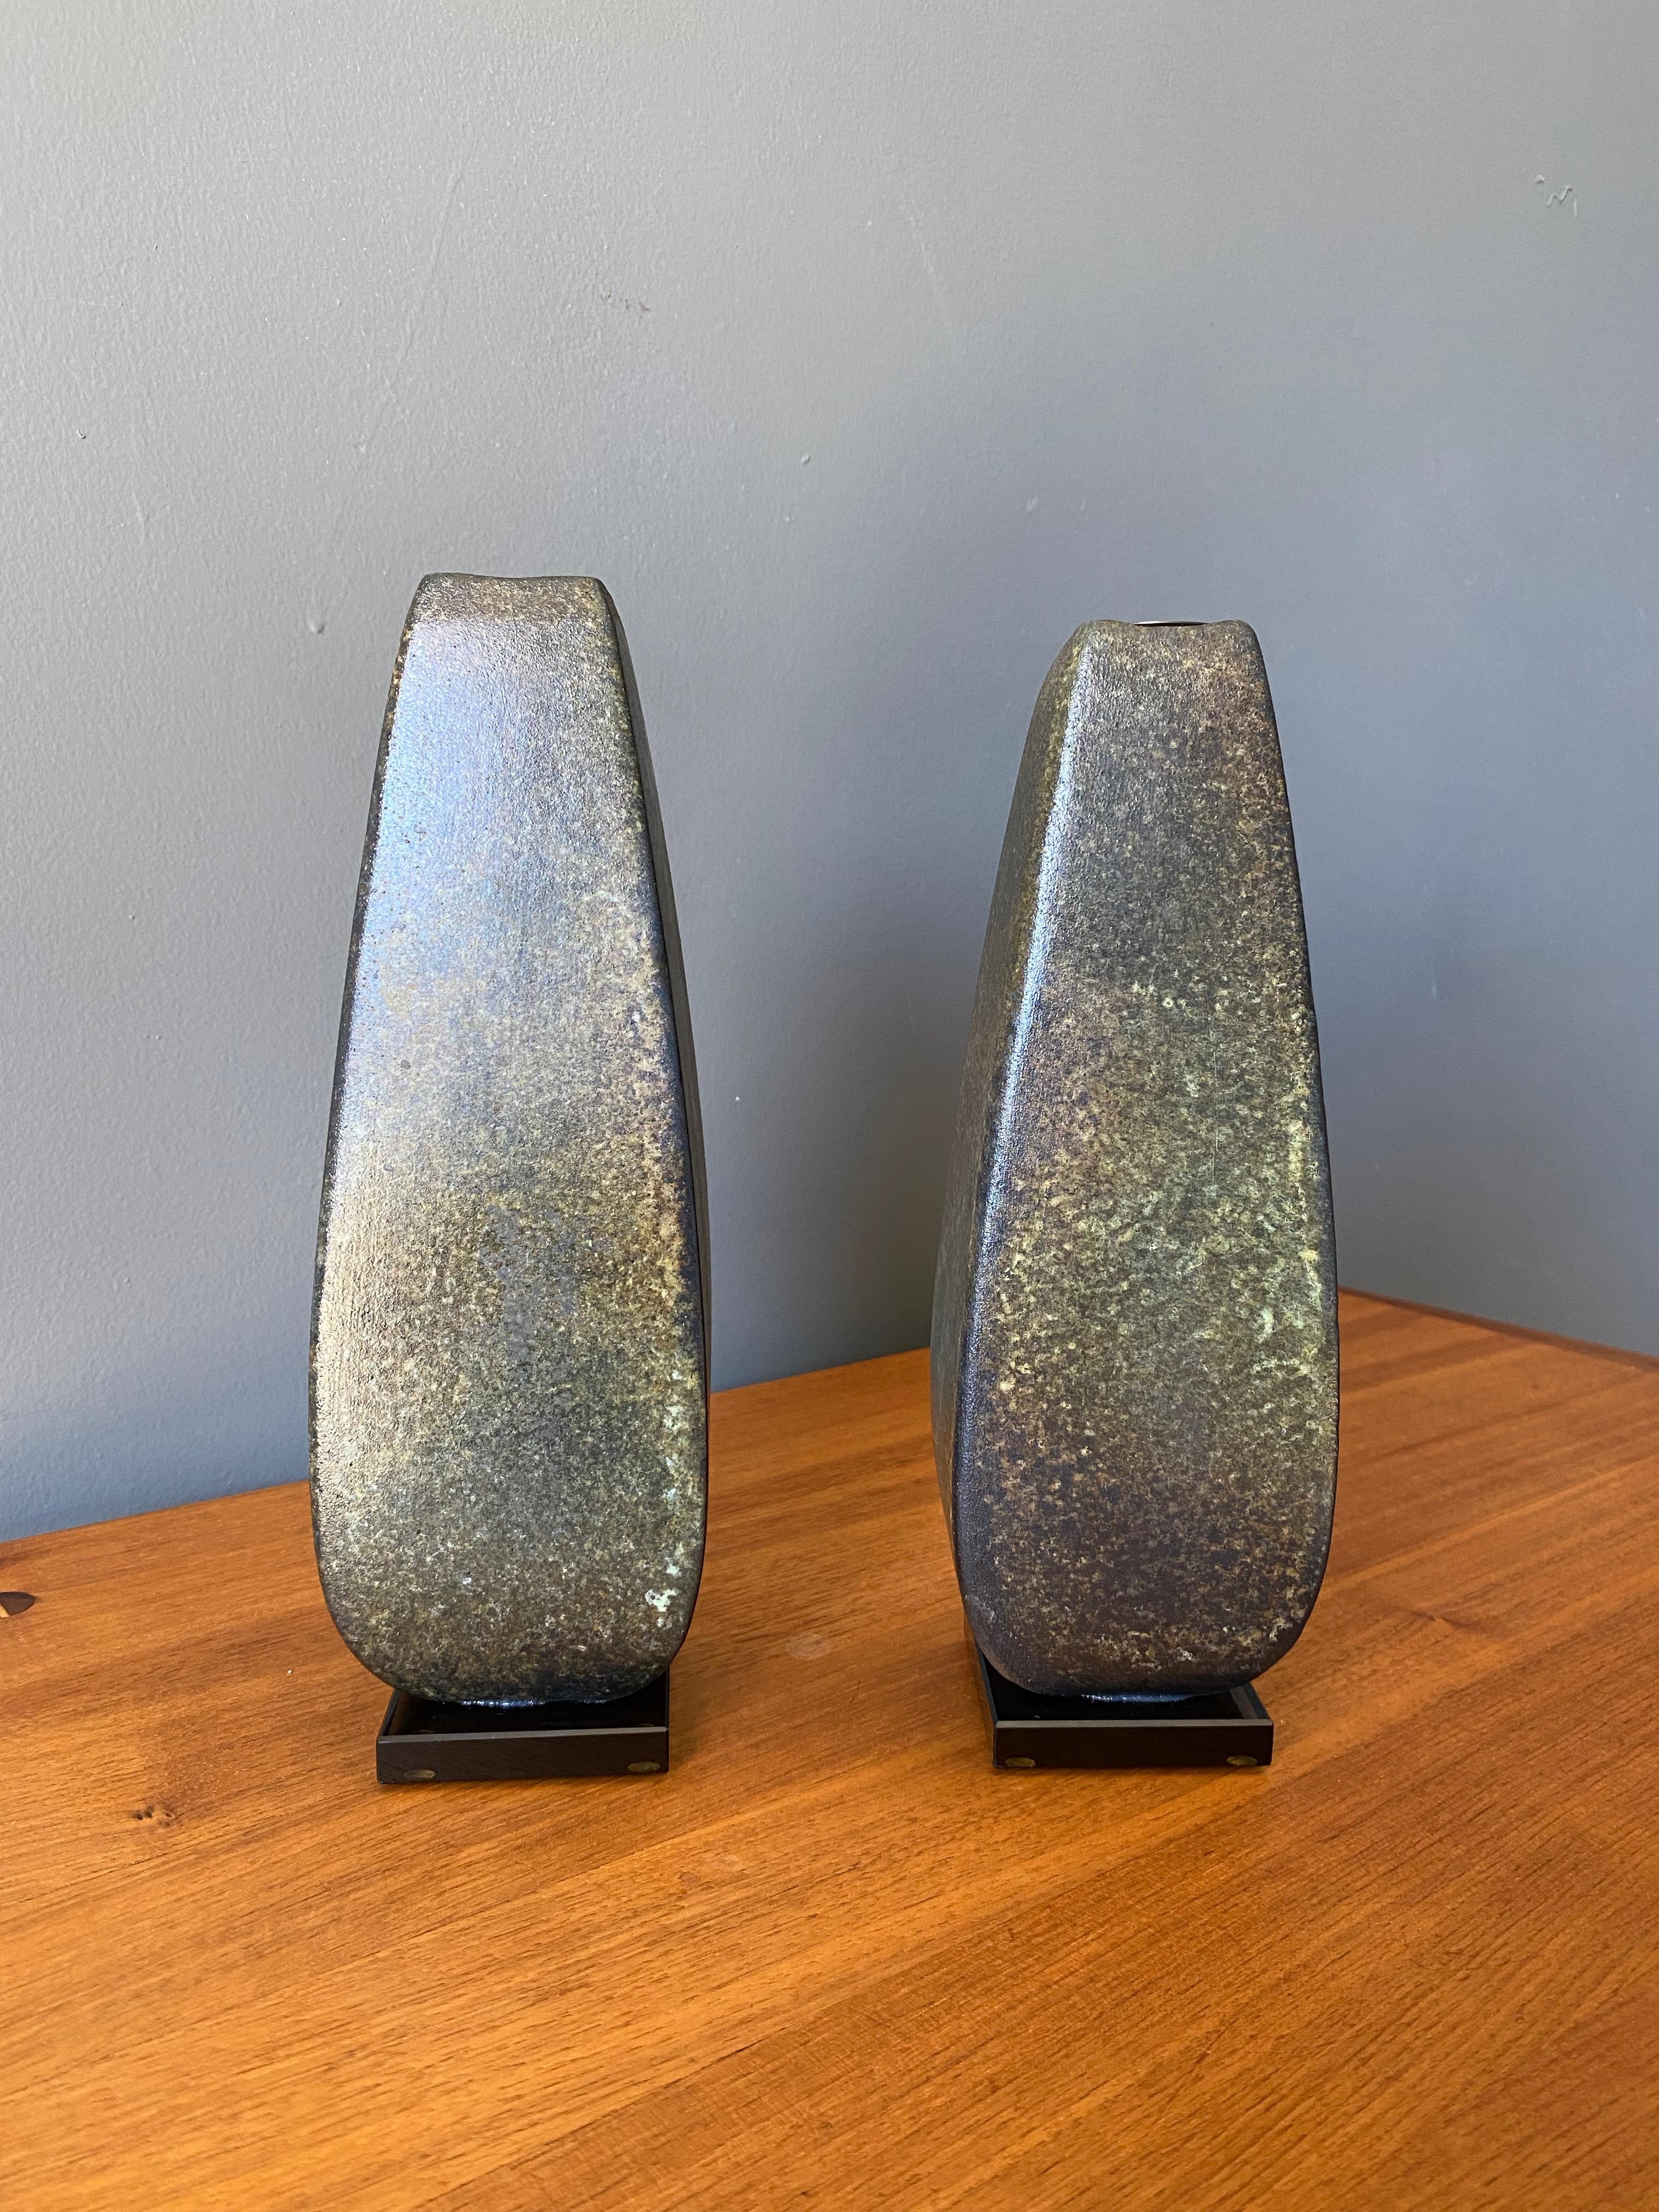 Post Modern candle holders signed on the underside By Tony Evans.